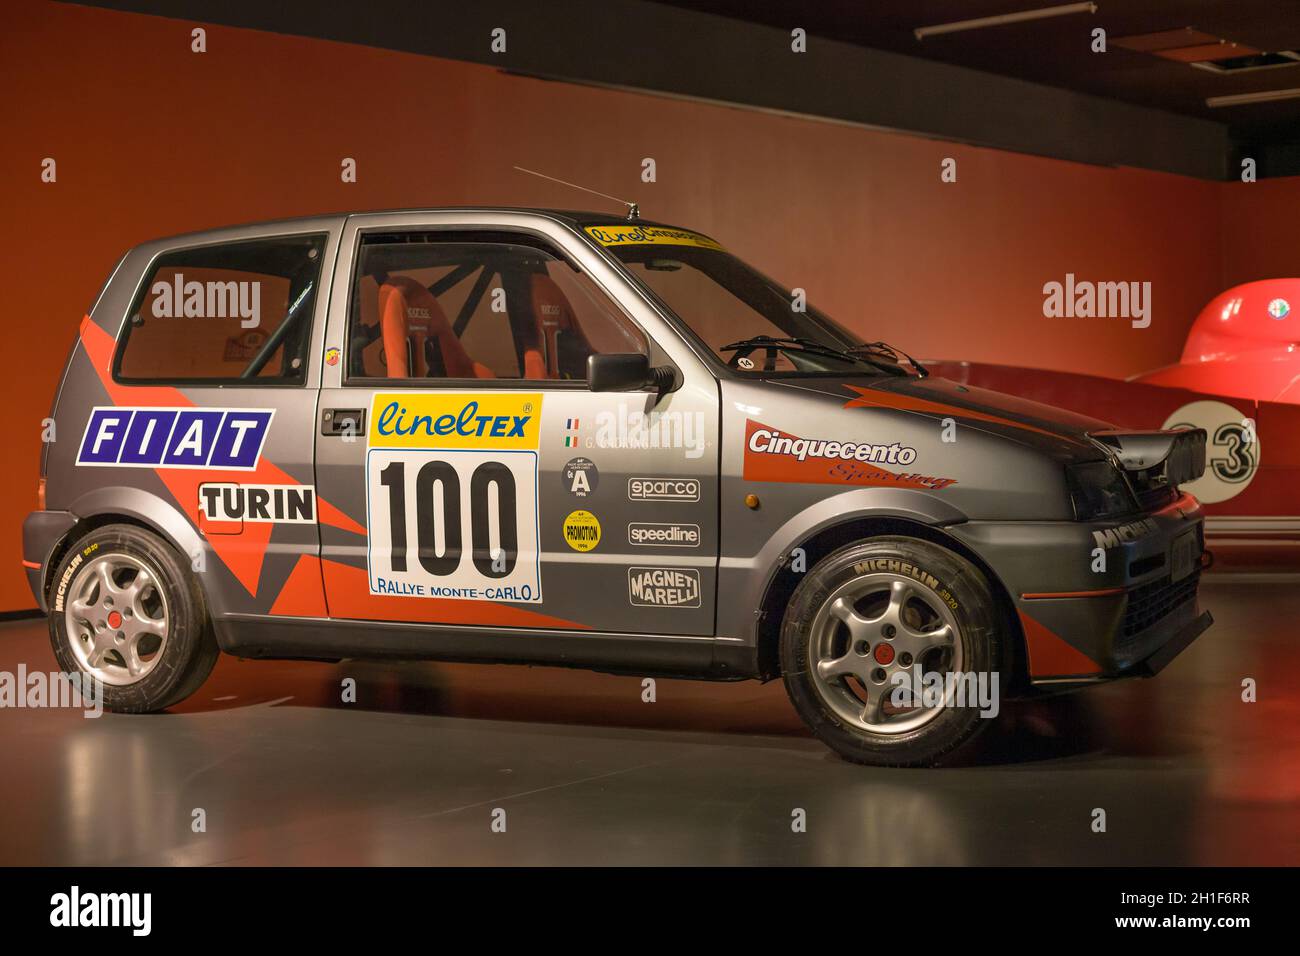 Torino, Italy - August 13, 2021: Fiat Cinquecento Sporting Kit showcased at the National Automobile Museum (MAUTO) in Torino, Italy. Stock Photo